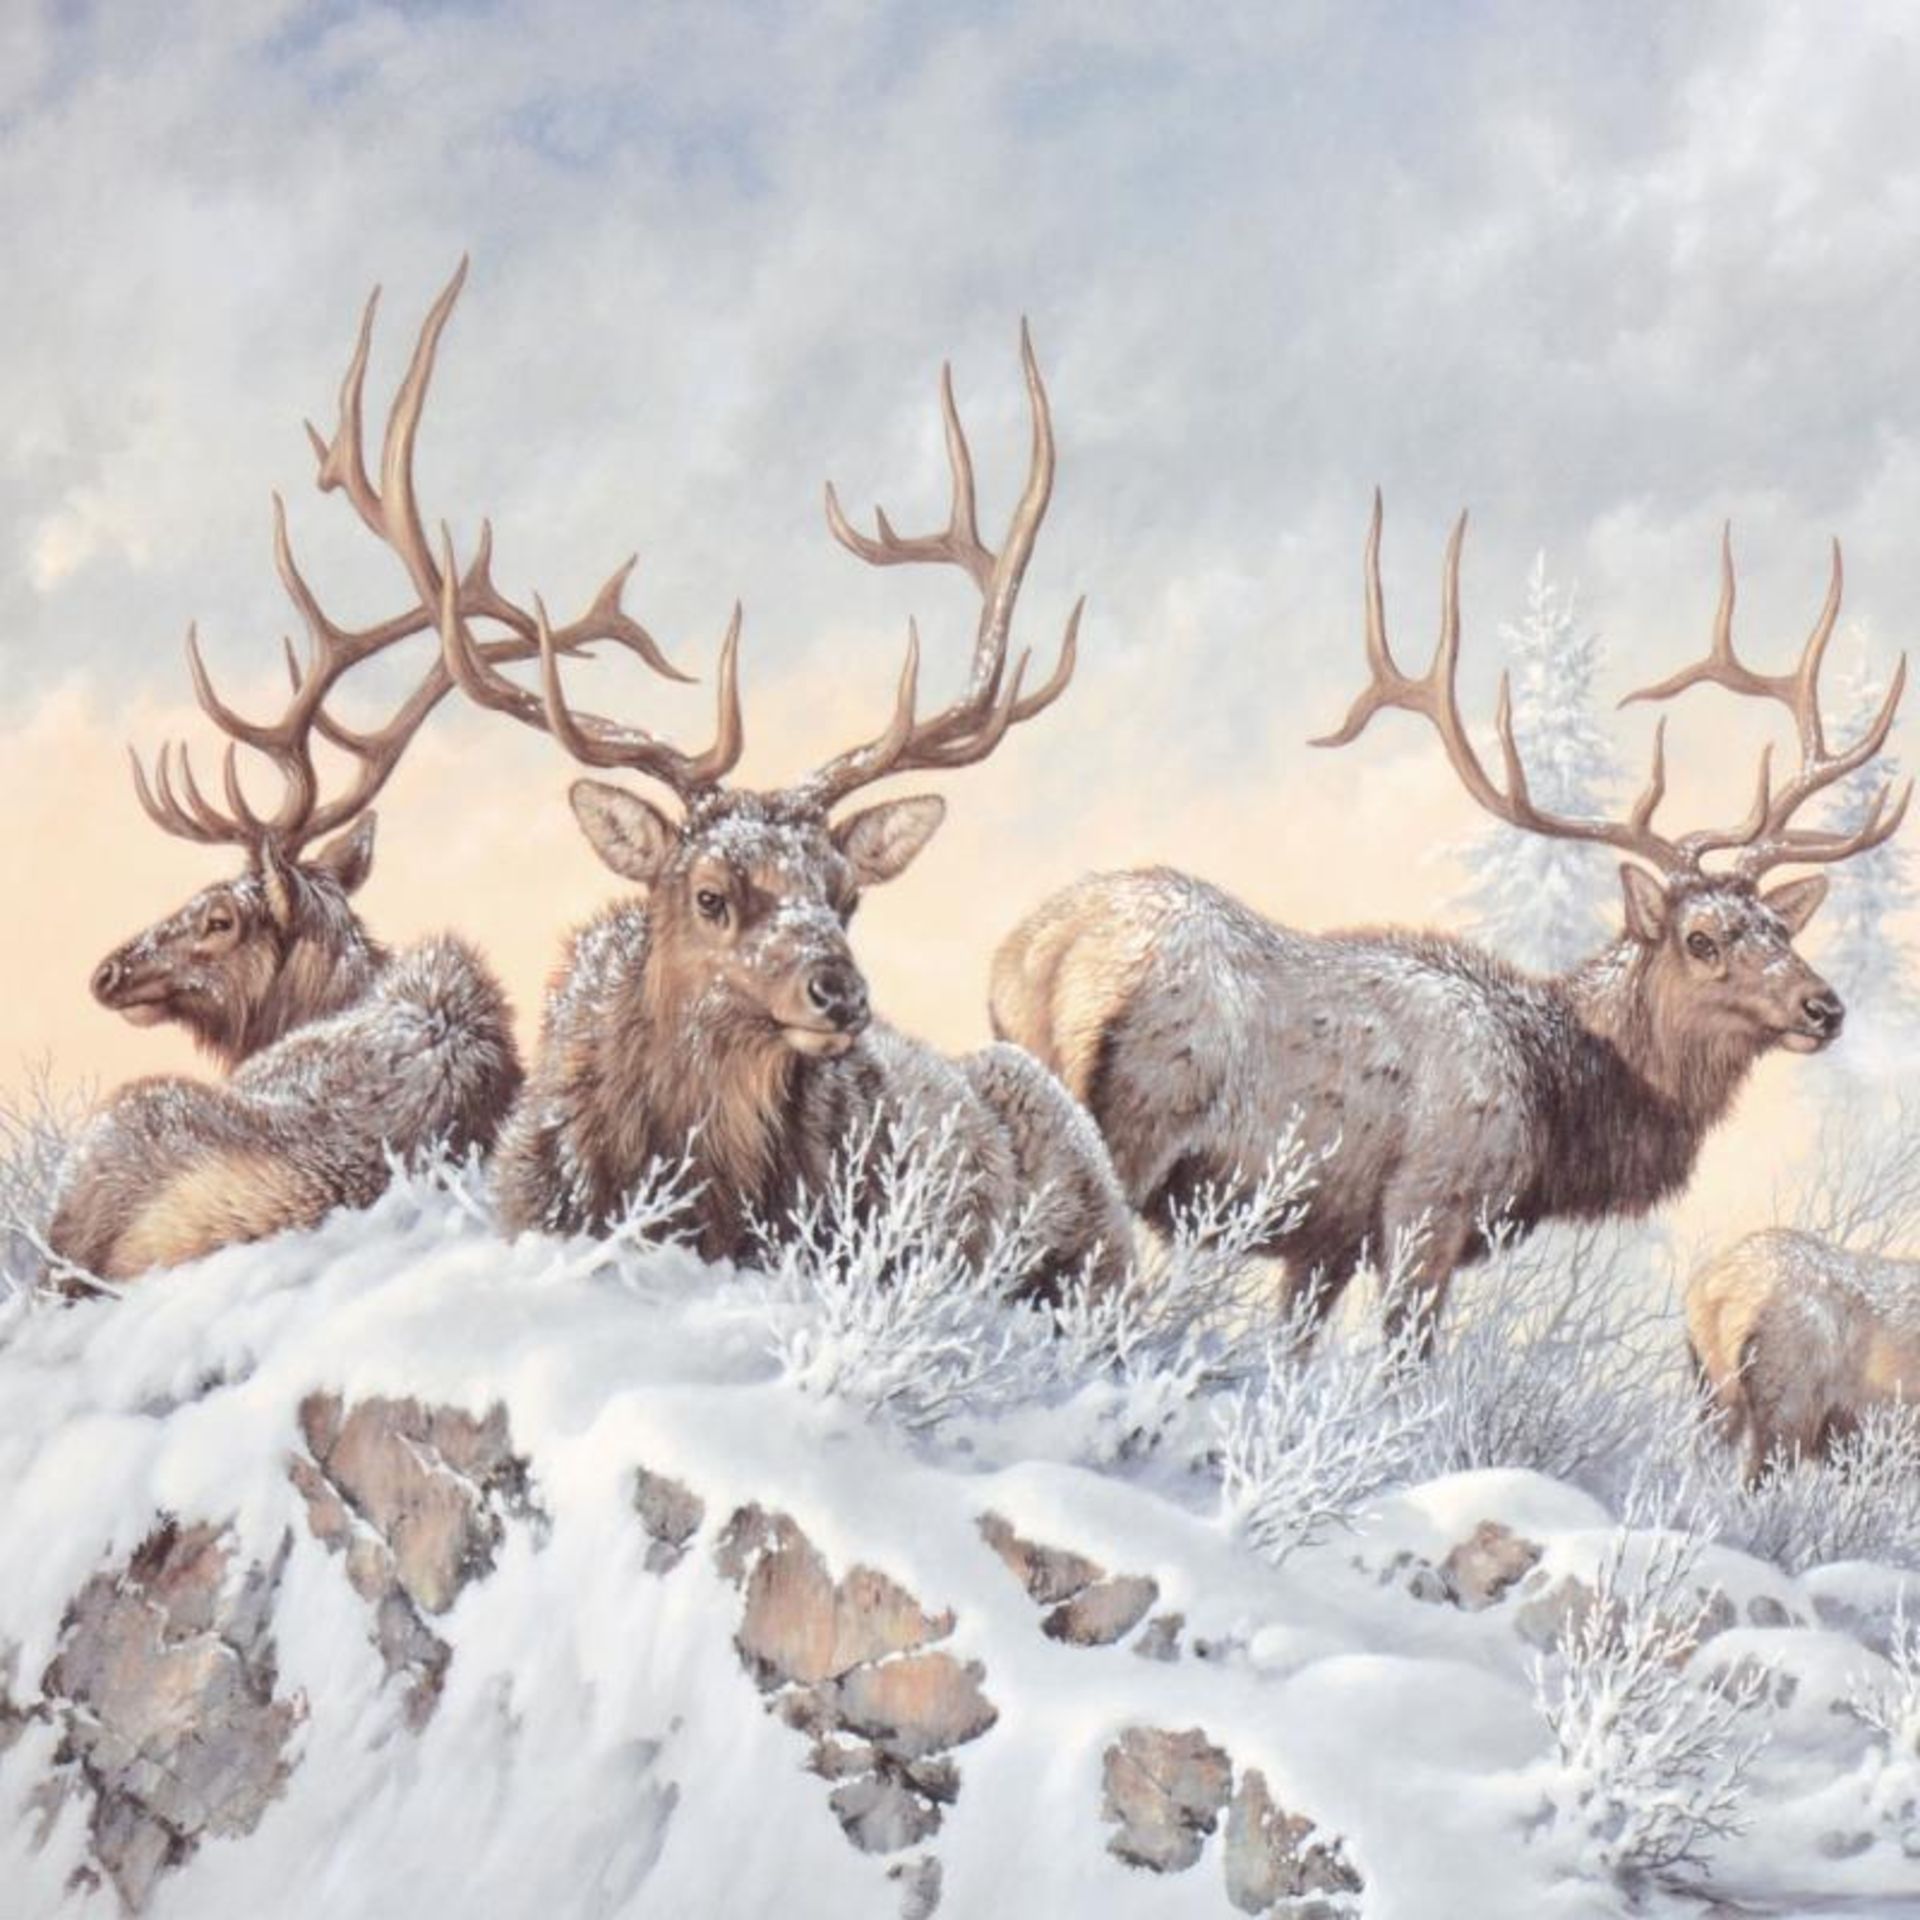 Larry Fanning (1938-2014), "Solstice Rendezvous - Elk" Limited Edition Lithograp - Image 2 of 3